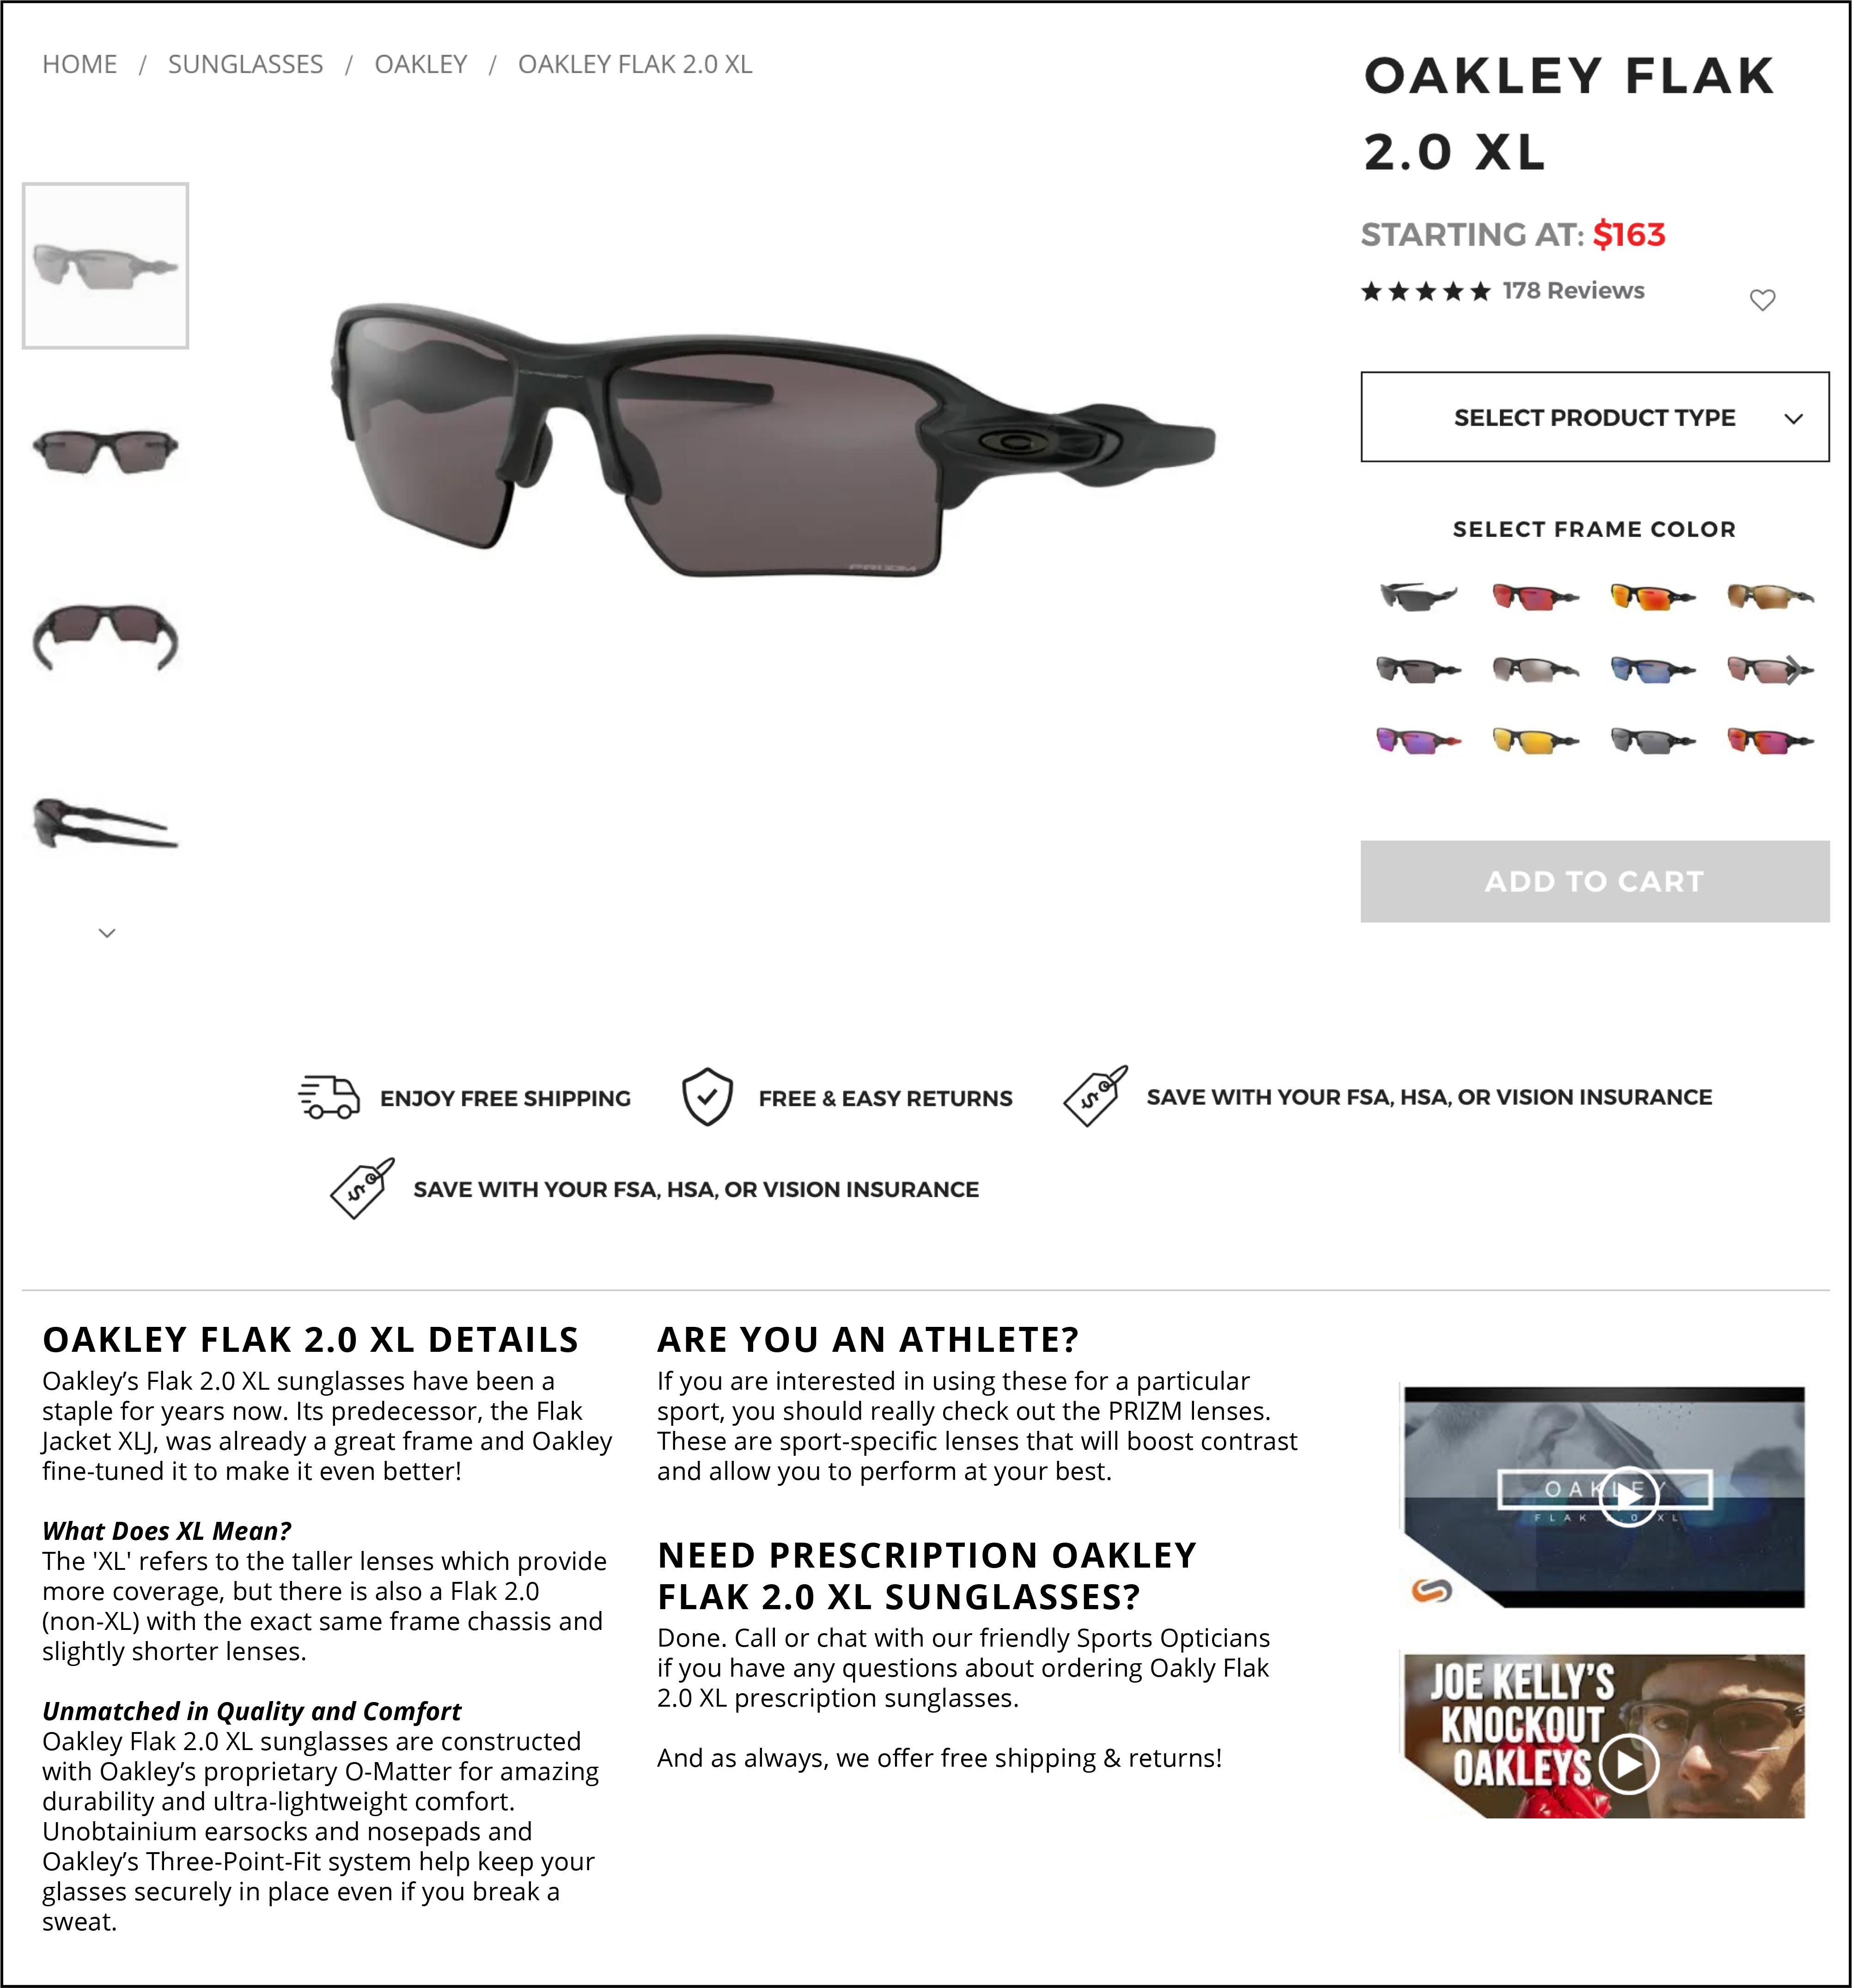 Our idea for the SportRx.com Oakley Flak 2.0 XL product page